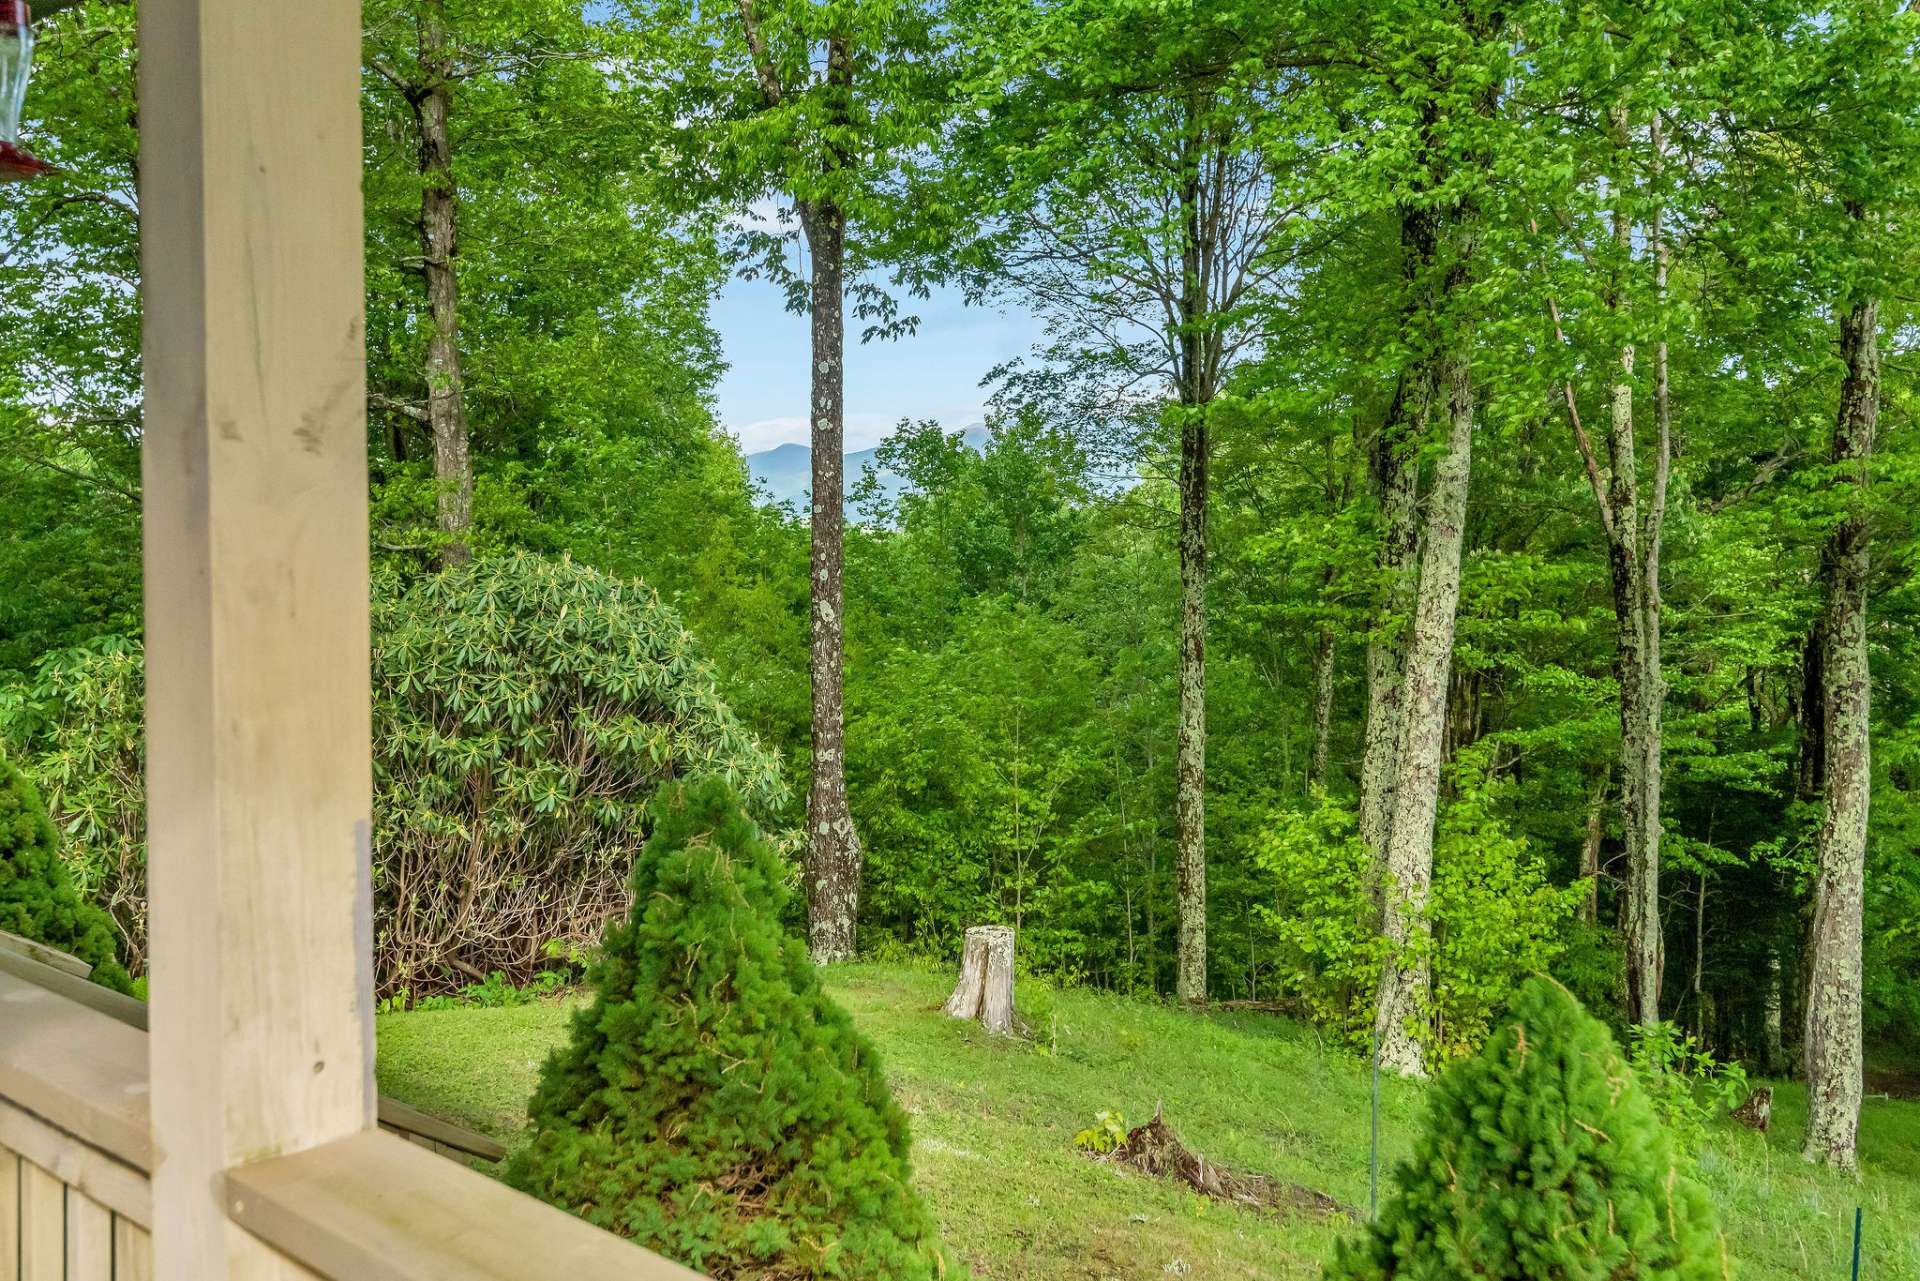 This property showcases a variety of mountain foliage.